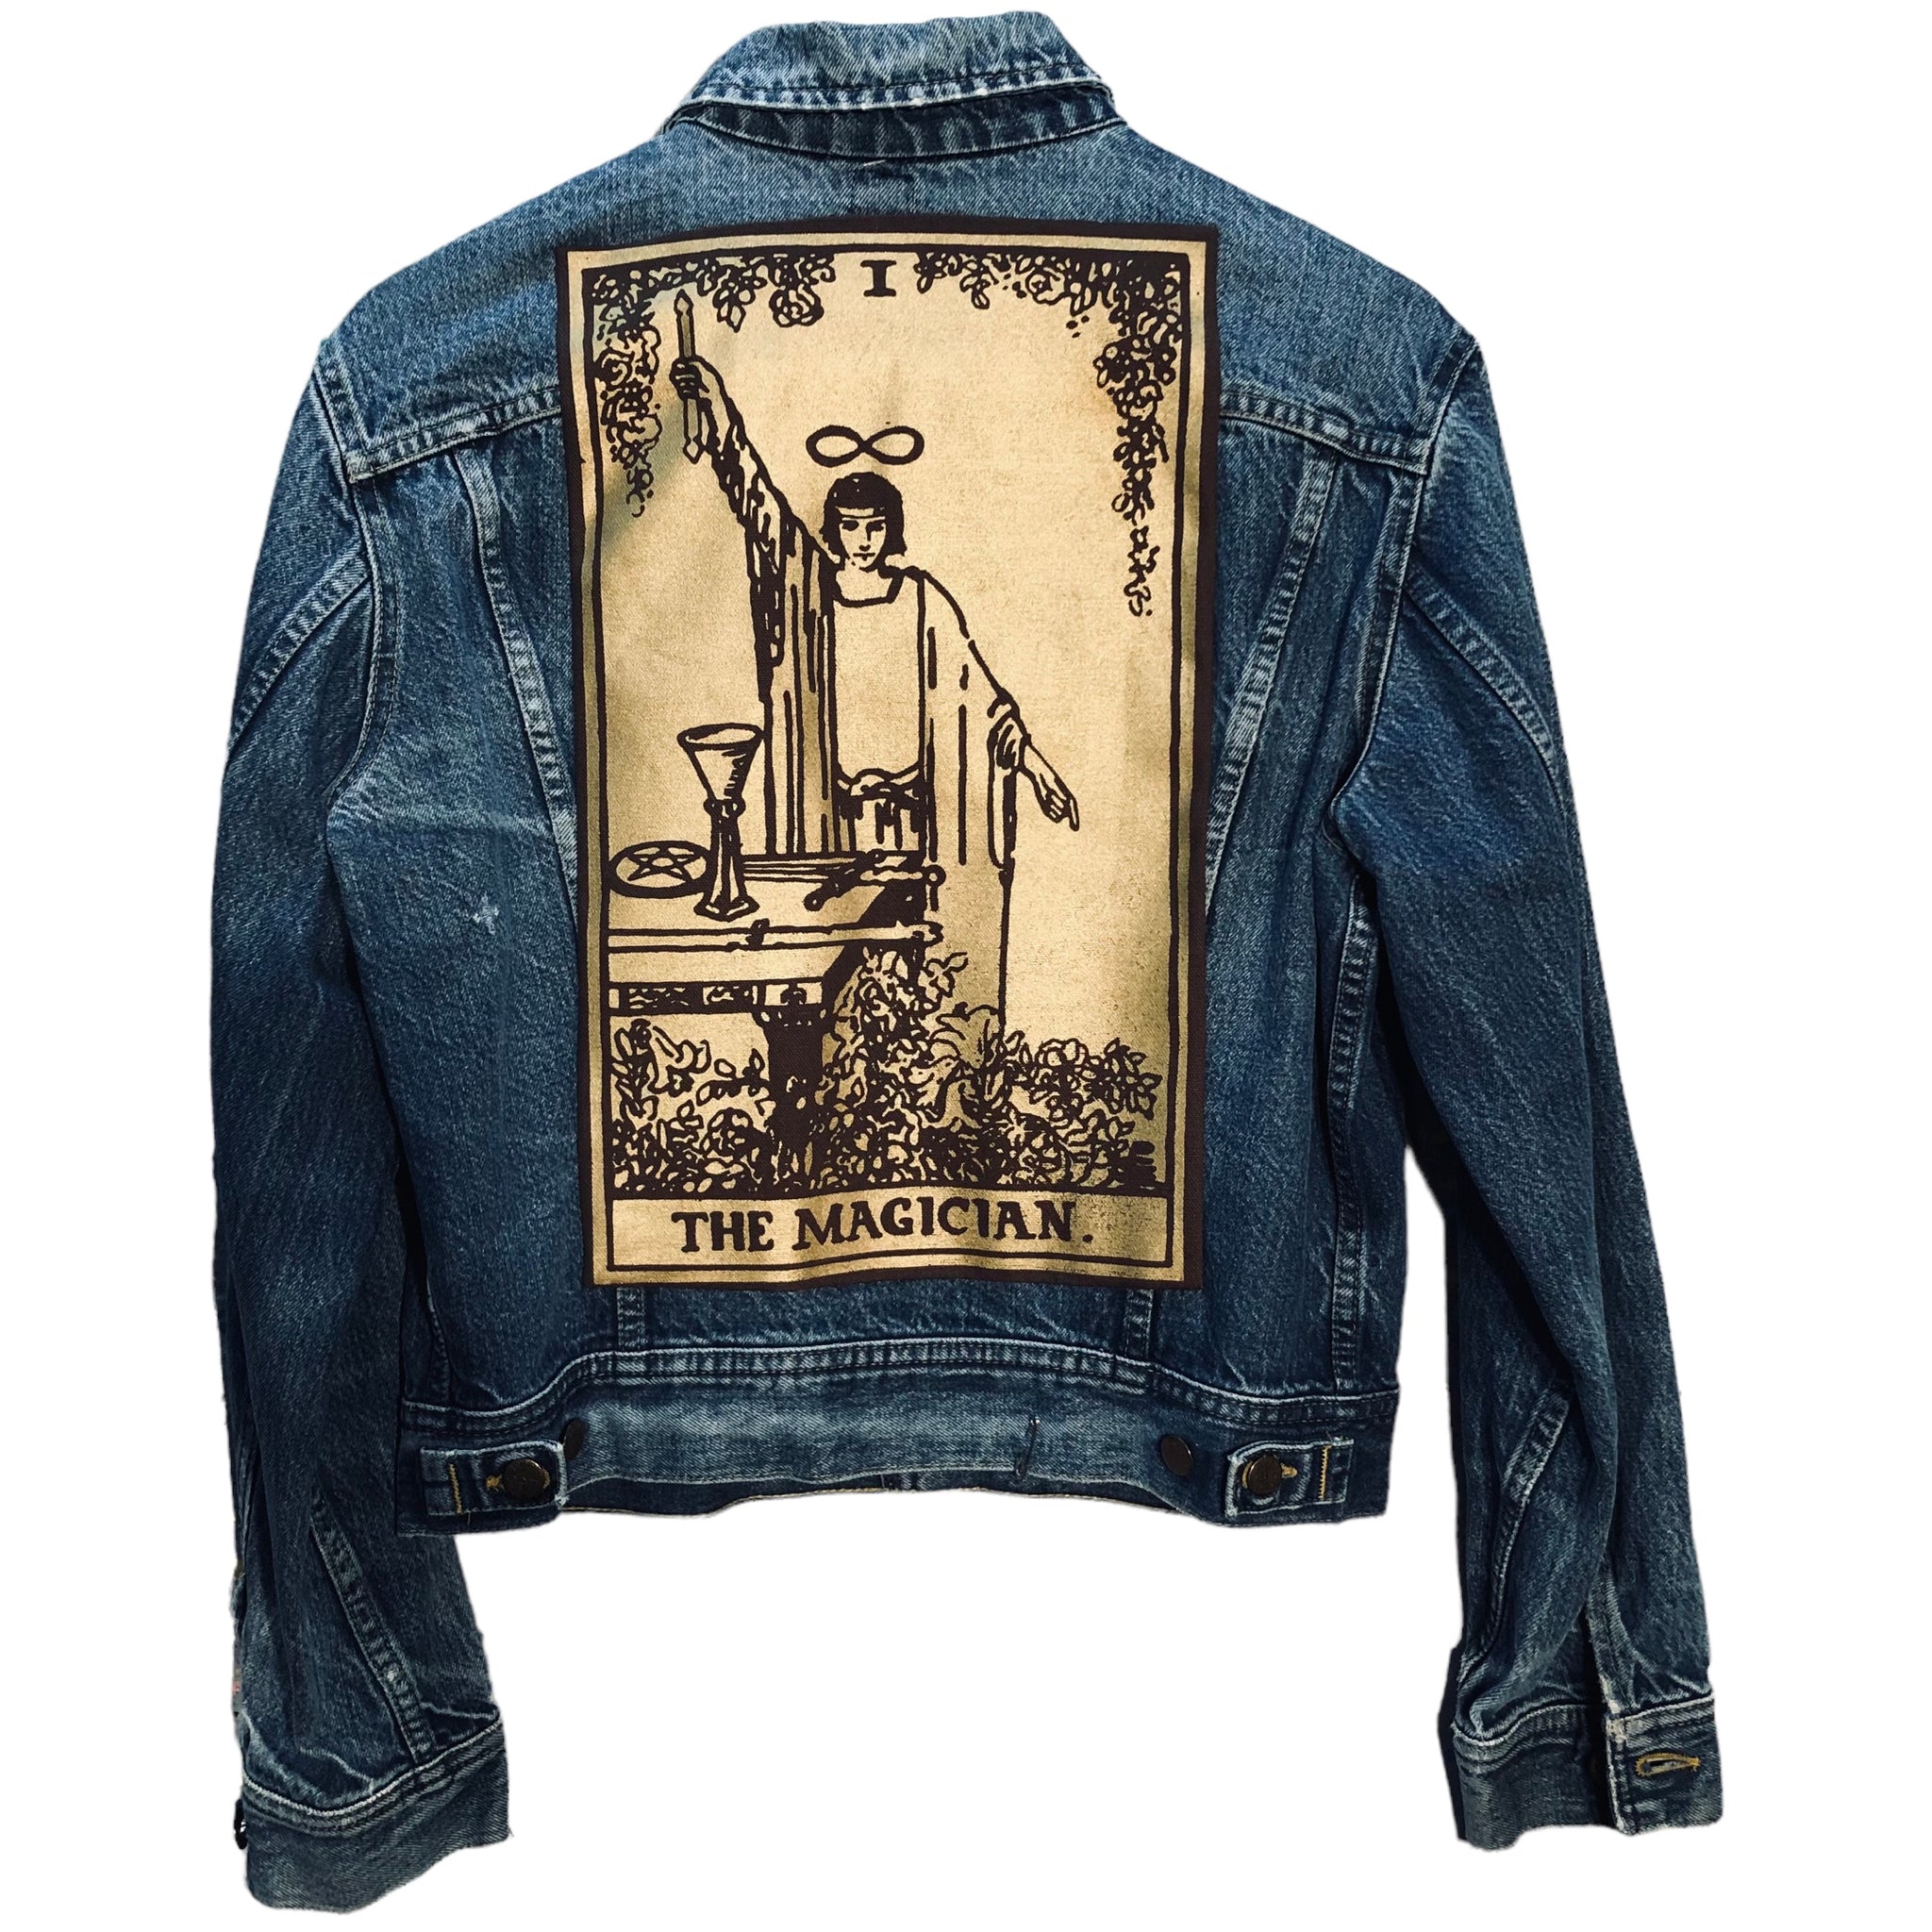 Ooak Magician Denim Jacket by Tooth and Claw